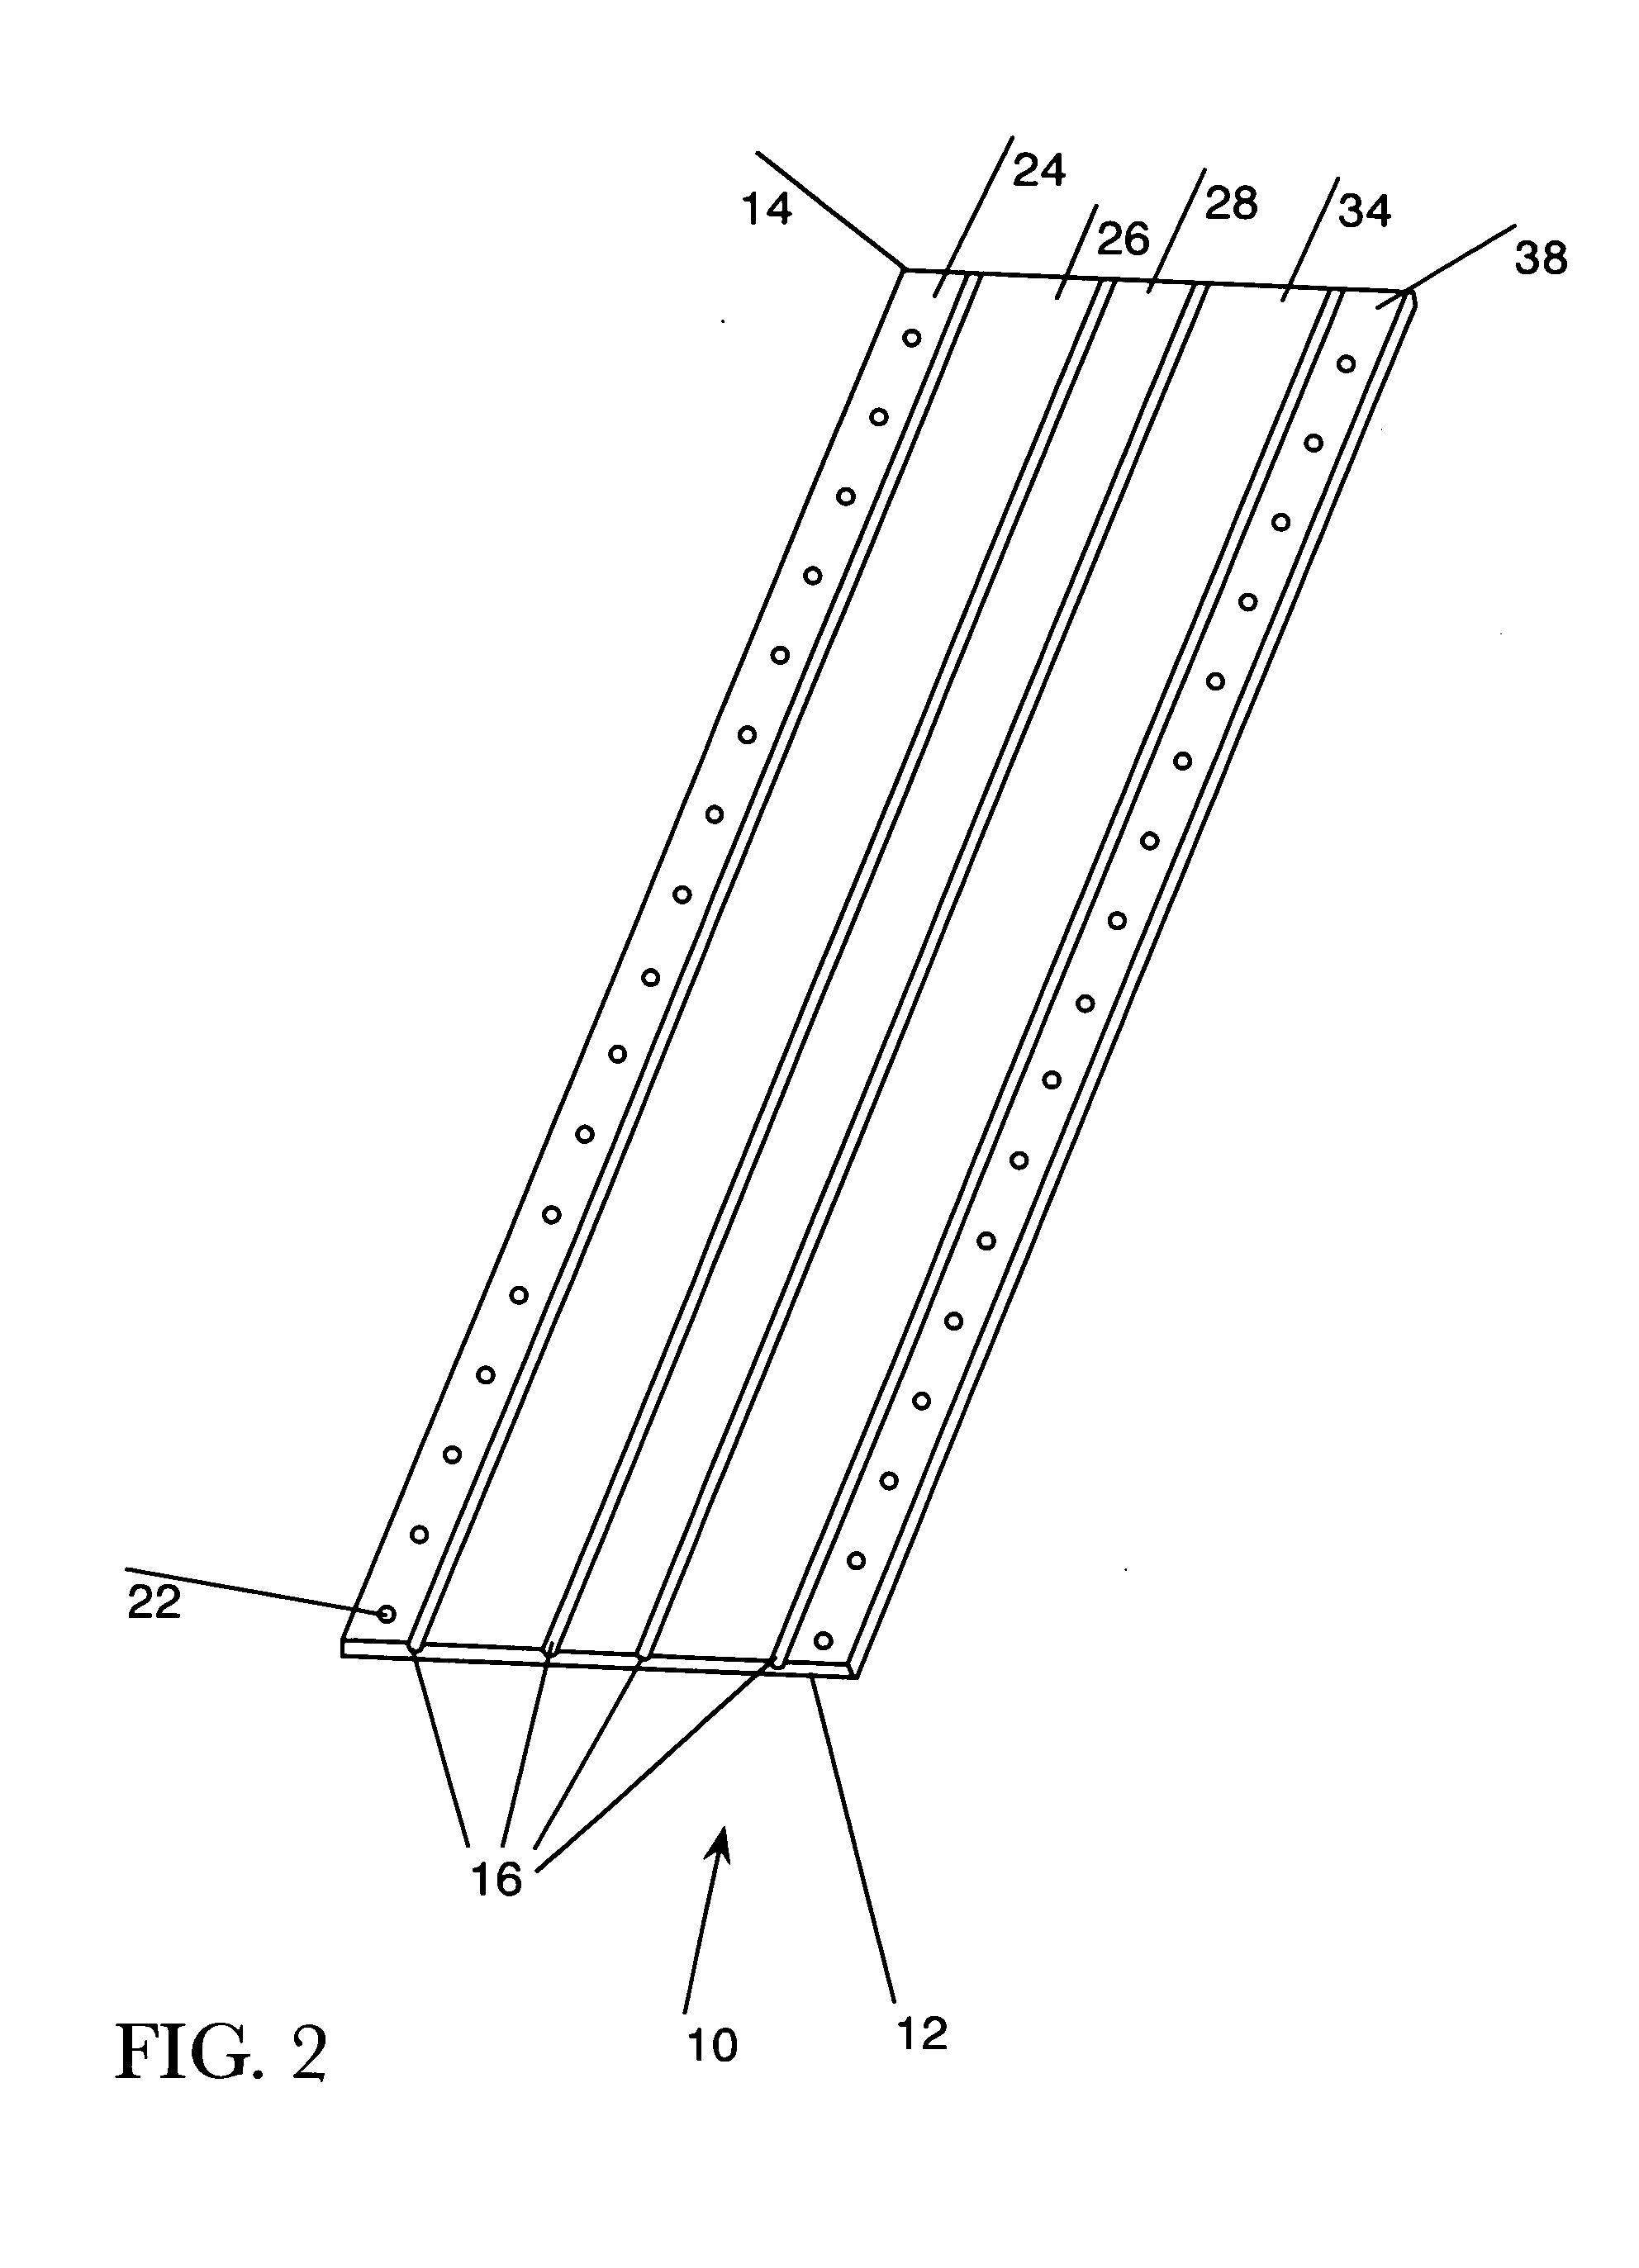 Method and apparatus for concealed installation of wires, cables, fibers, pipes and the like within a structure